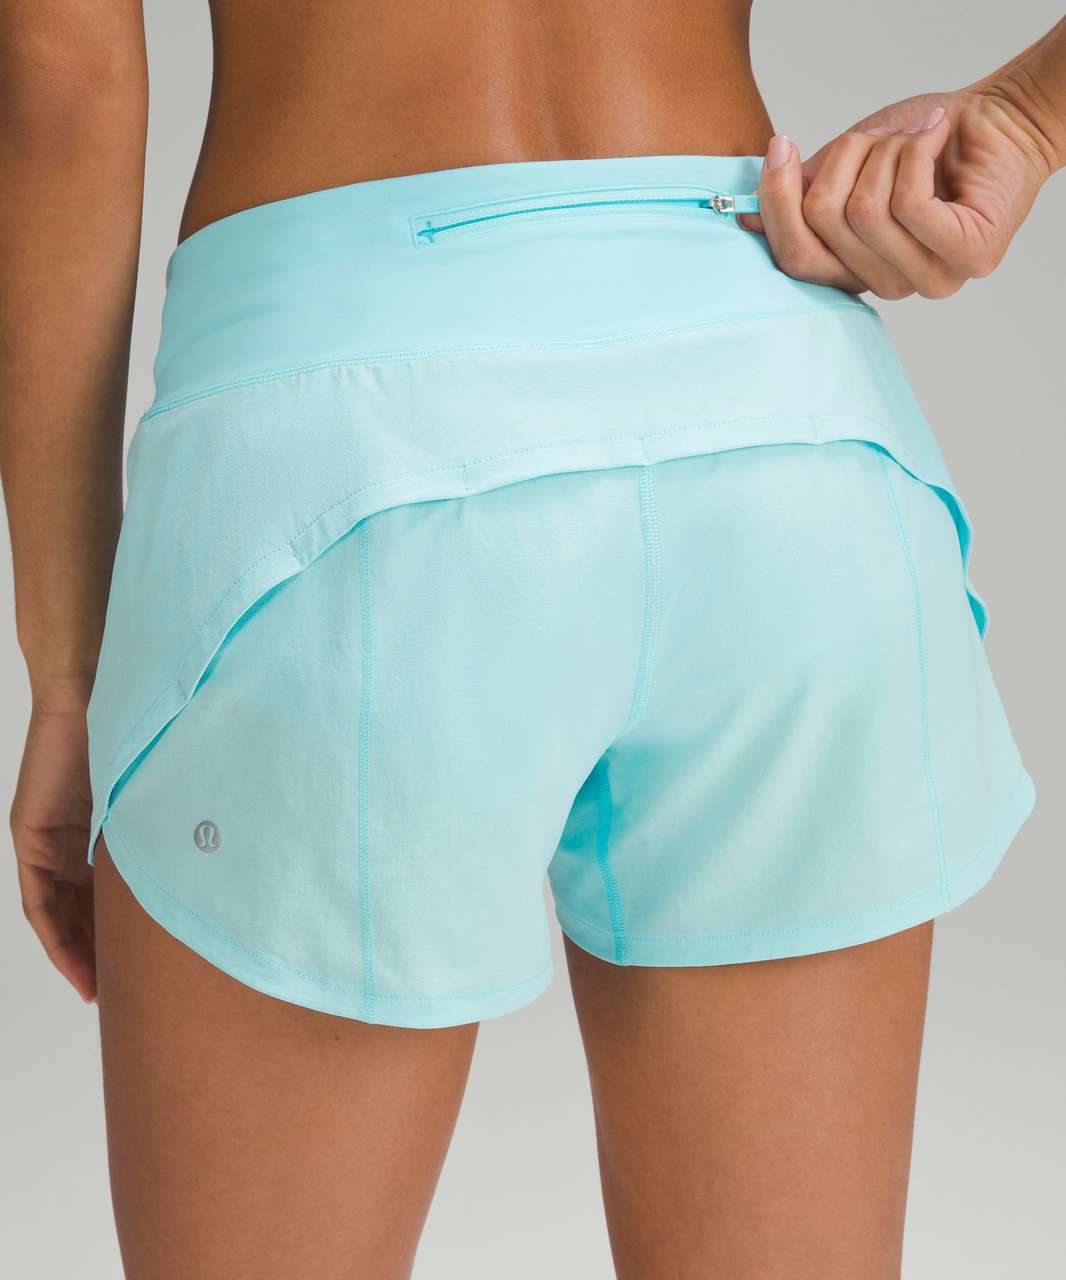 NEW Women Lululemon Speed Up High-Rise Lined Short 4 Blue Chill Size 8 & 10